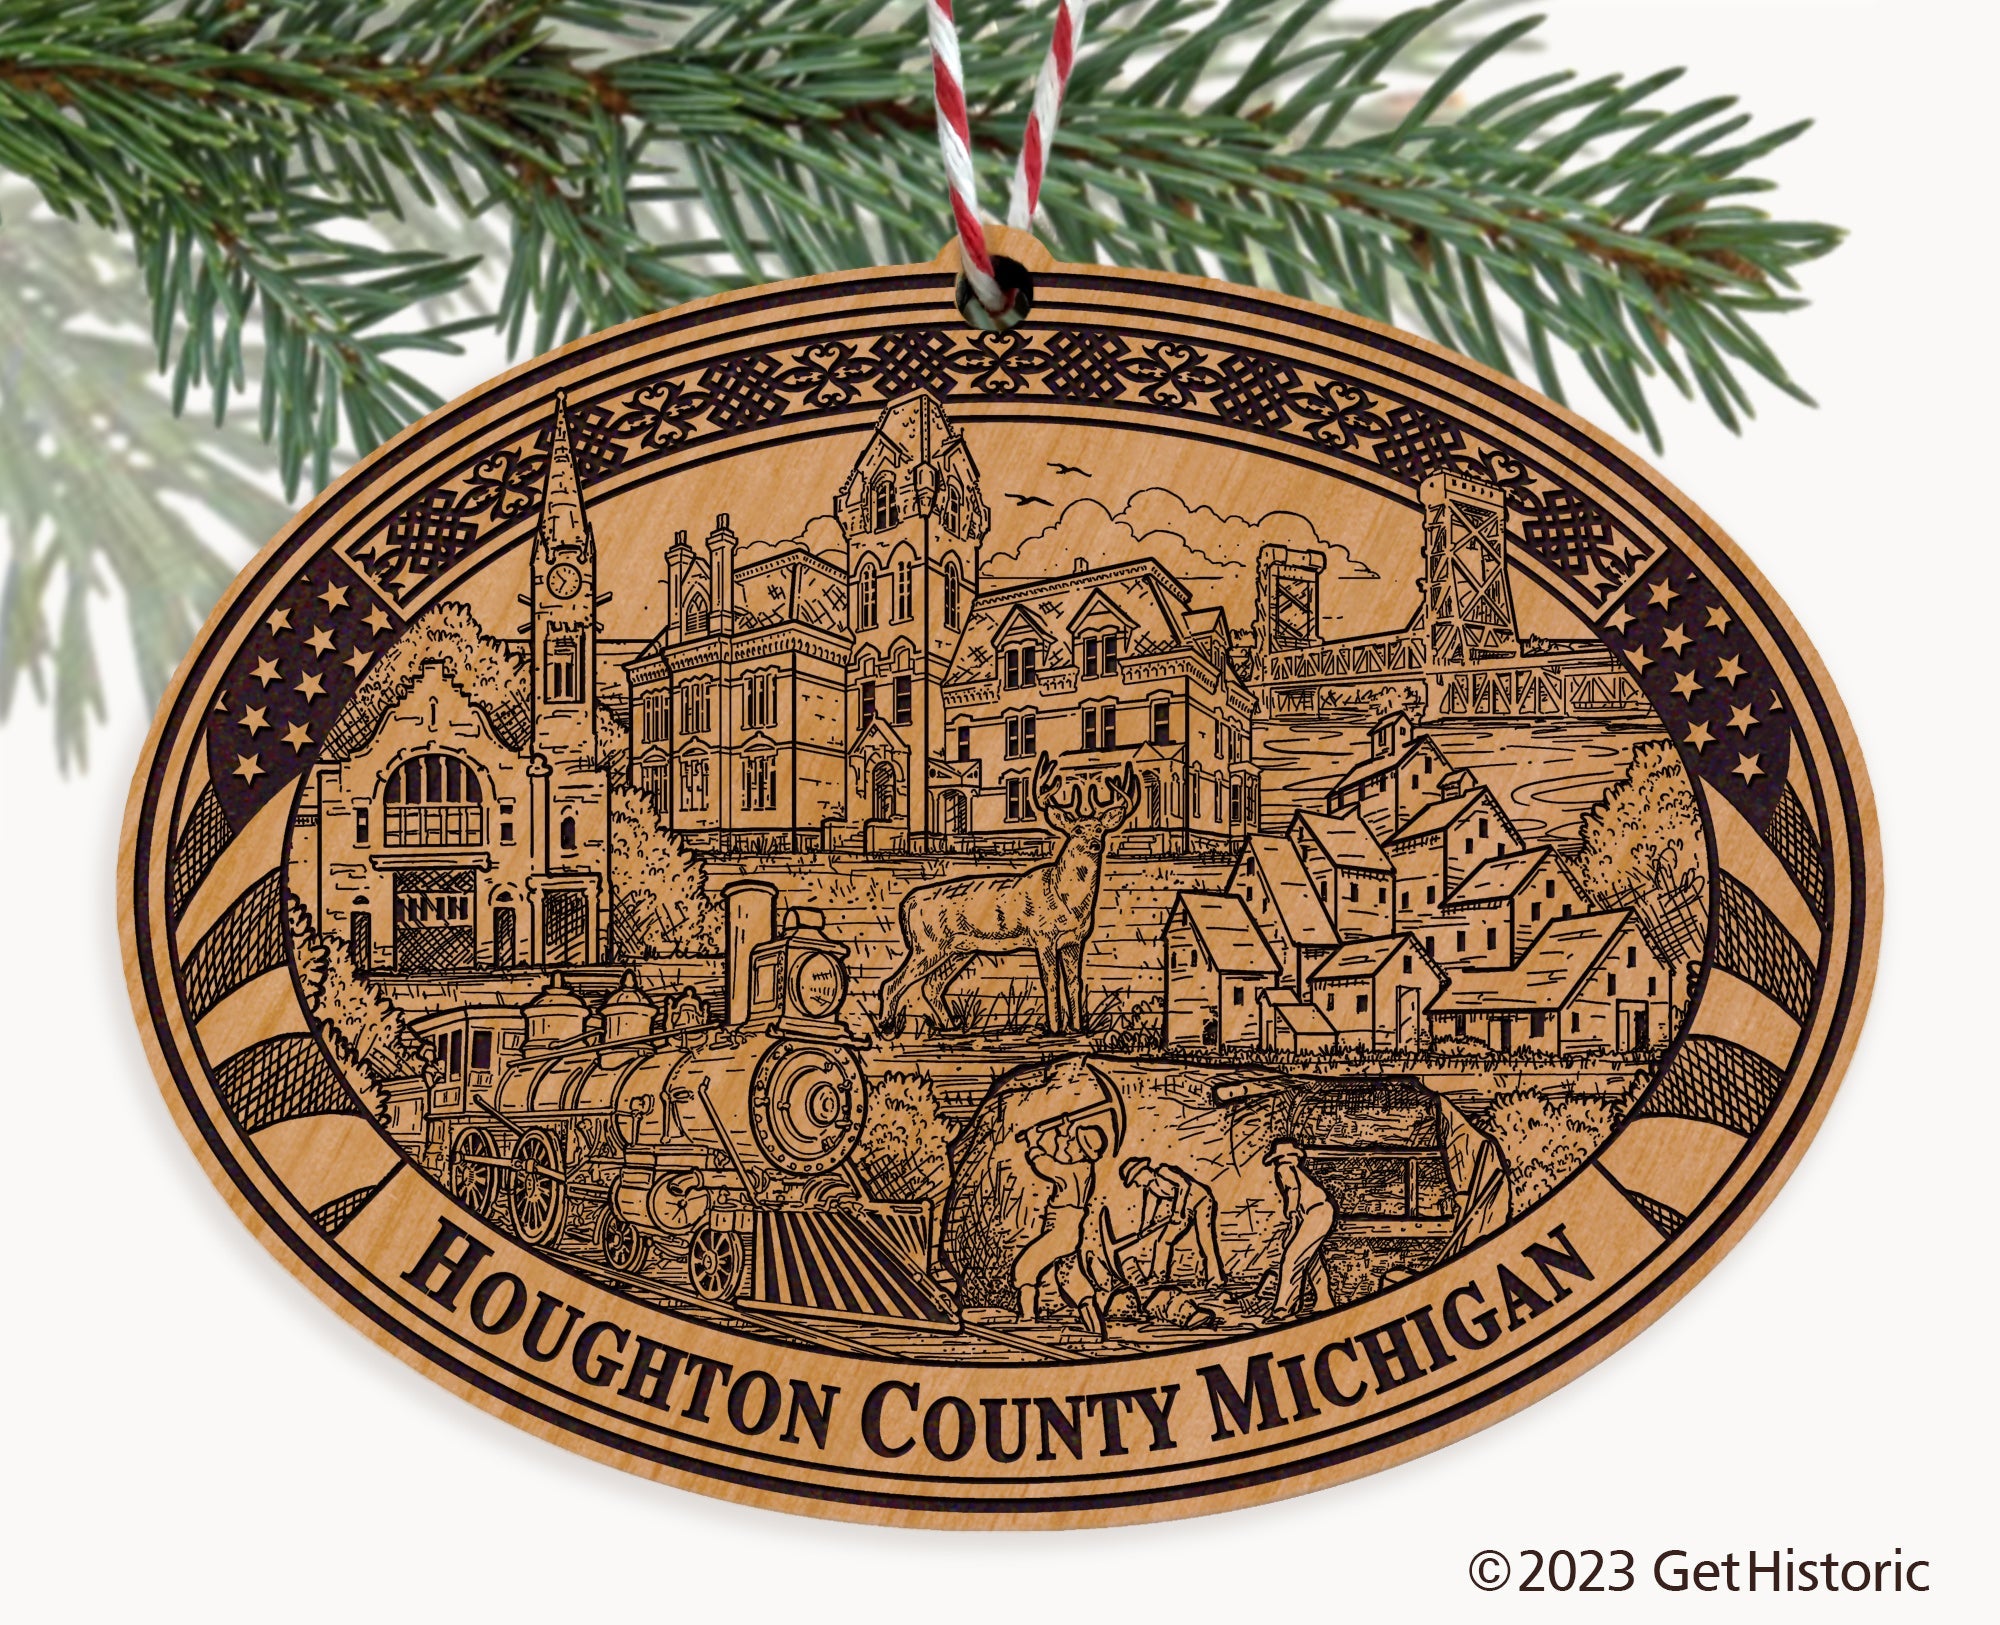 Houghton County Michigan Engraved Natural Ornament